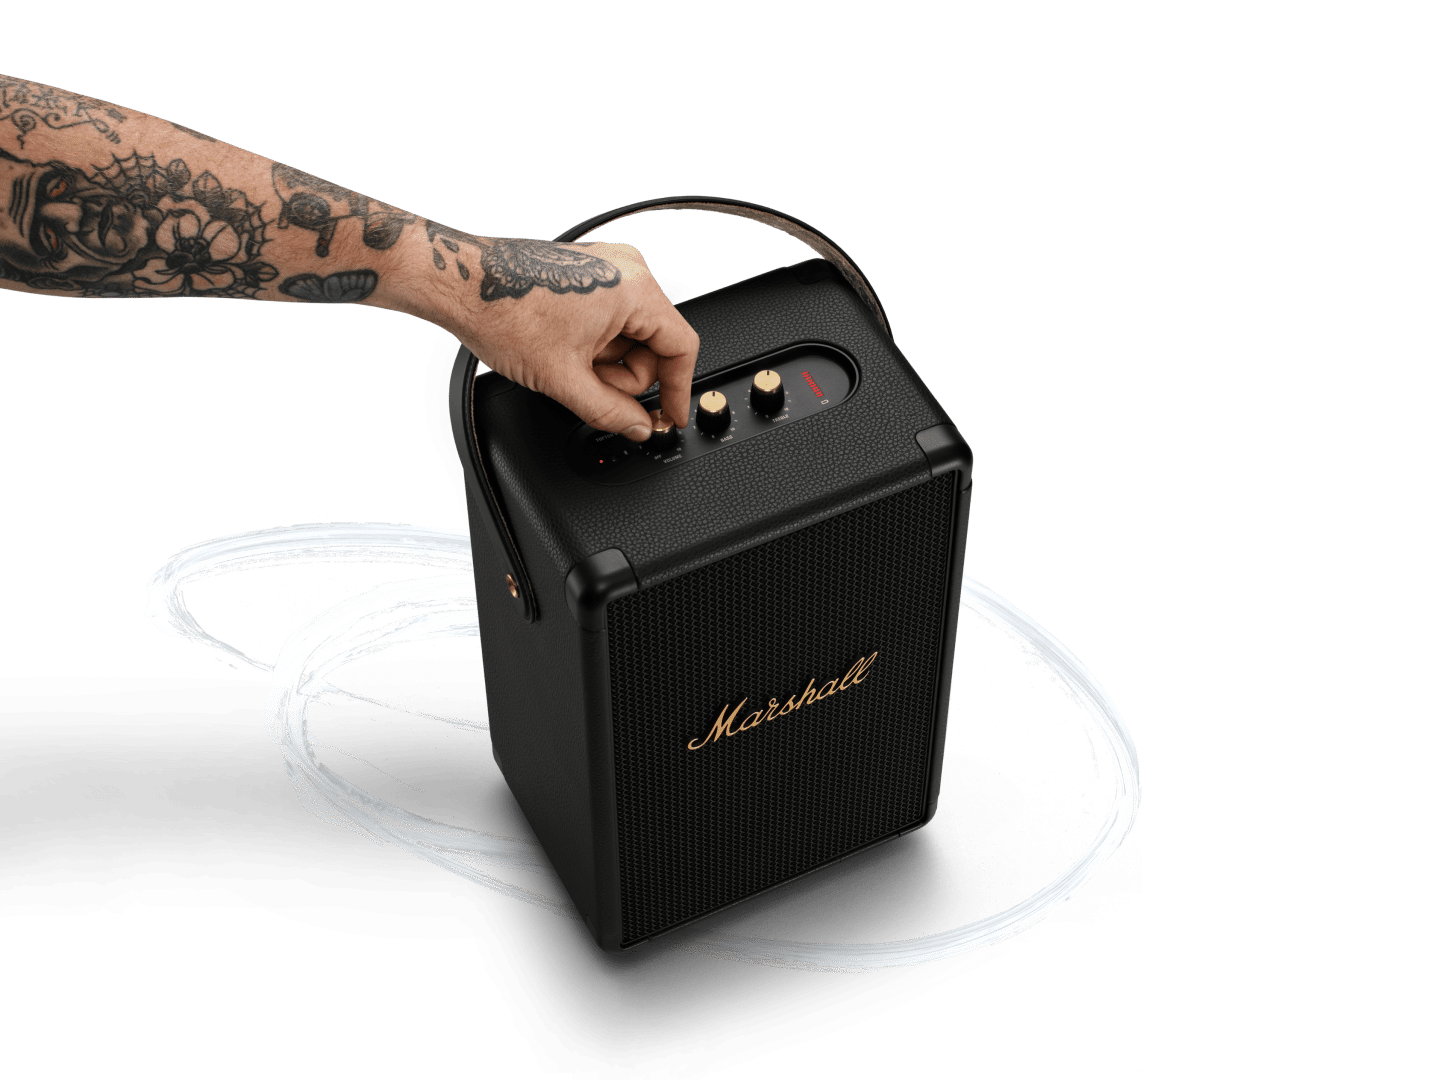 Tufton portable speaker delivers powerful sound and long playtime 